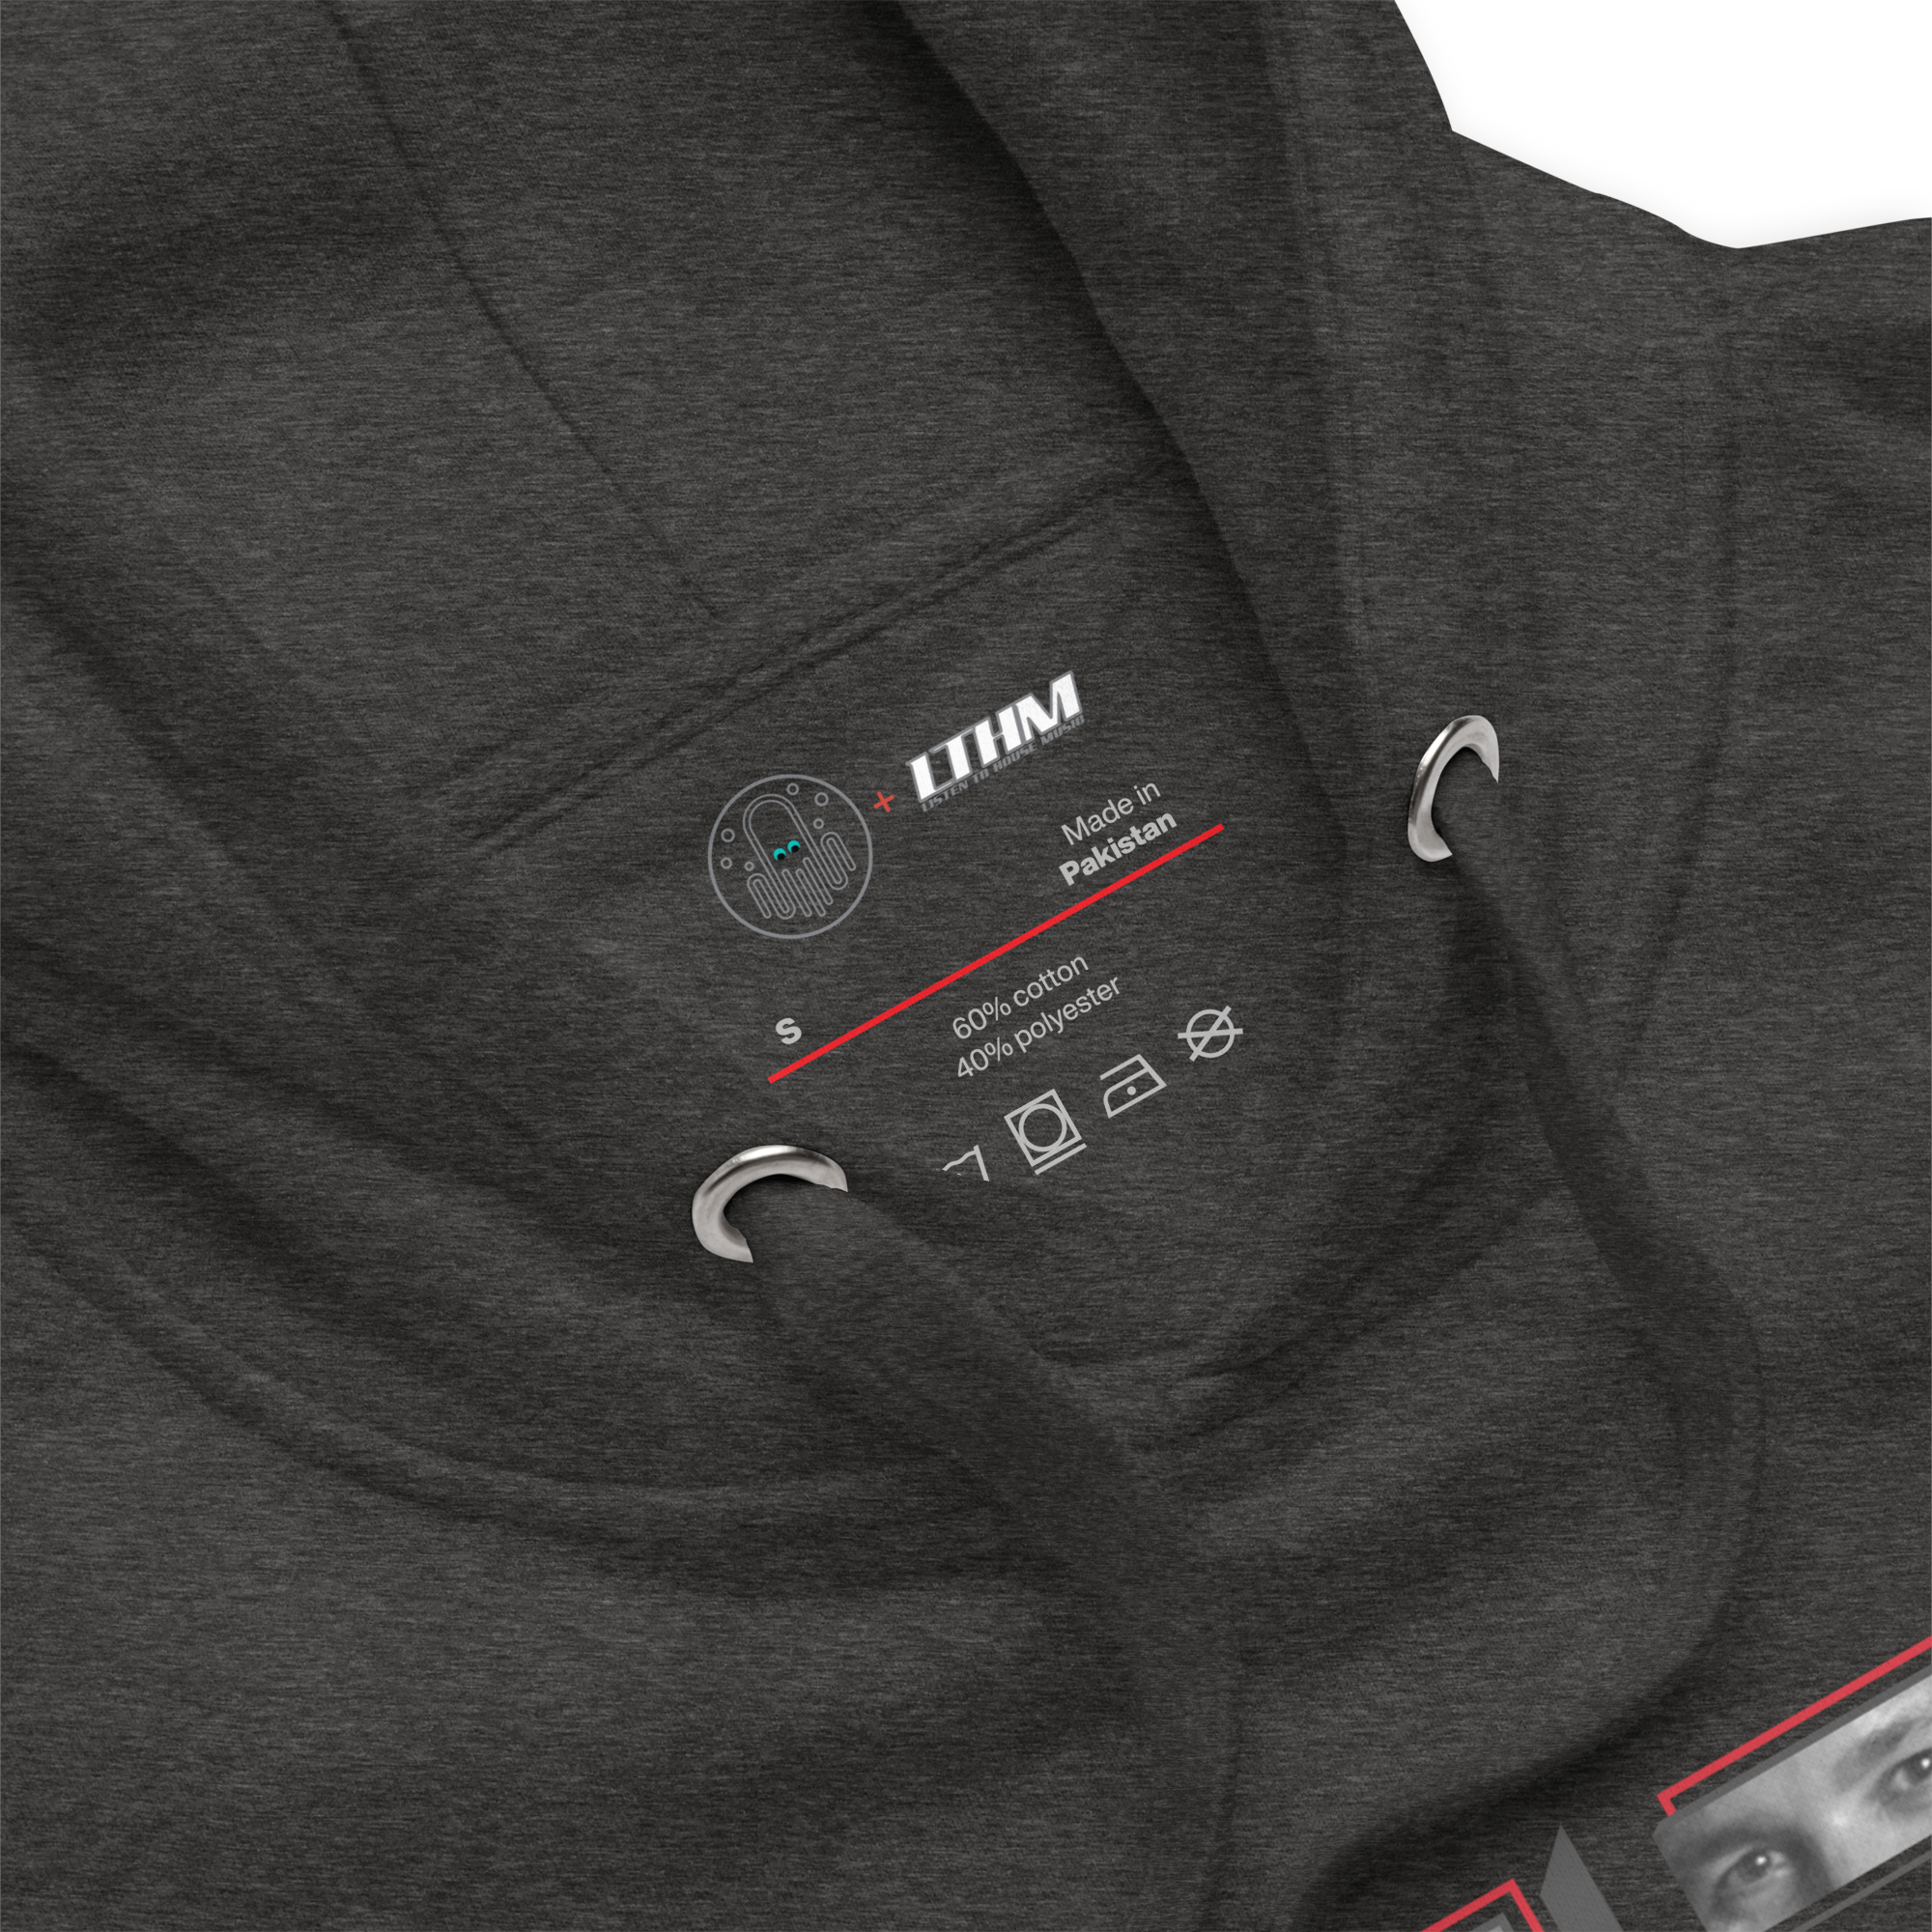 Charcoal Heather LTHM Essentials 4 Graphic Hoodie Zoomed View of Hood and Inside Label